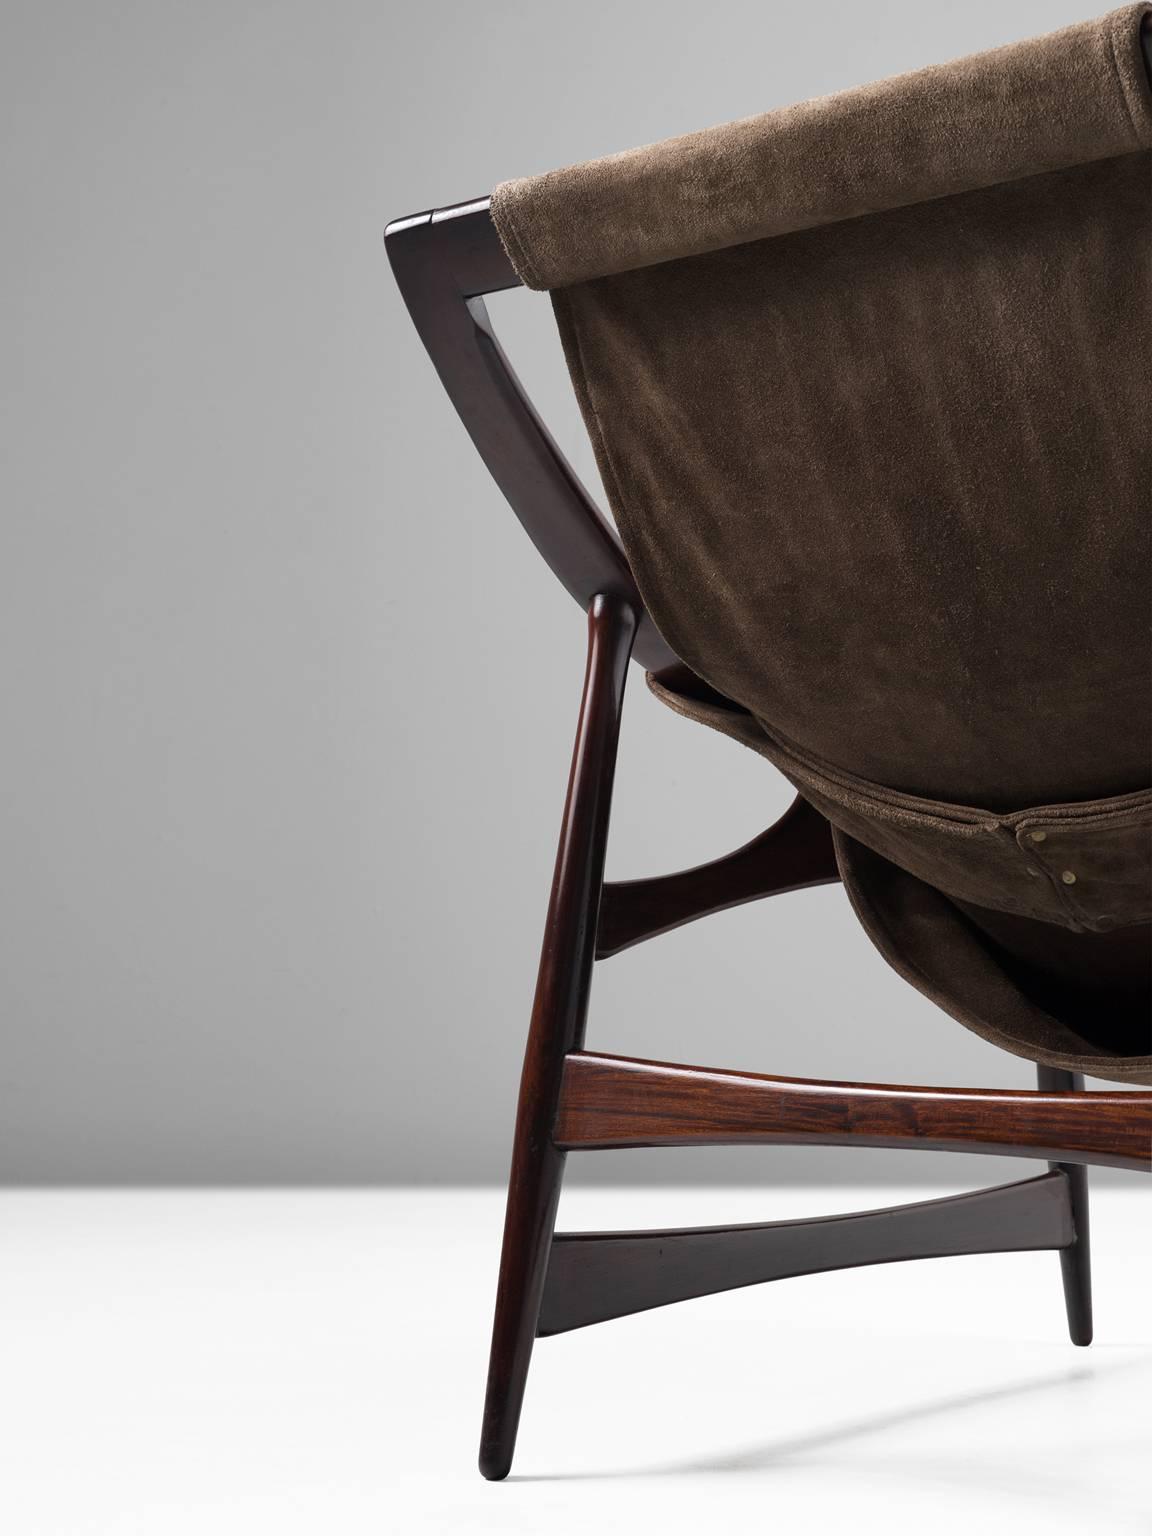 Leather Liceu De Artes Sao Paulo Lounge Chair in Rosewood and Brown Suede